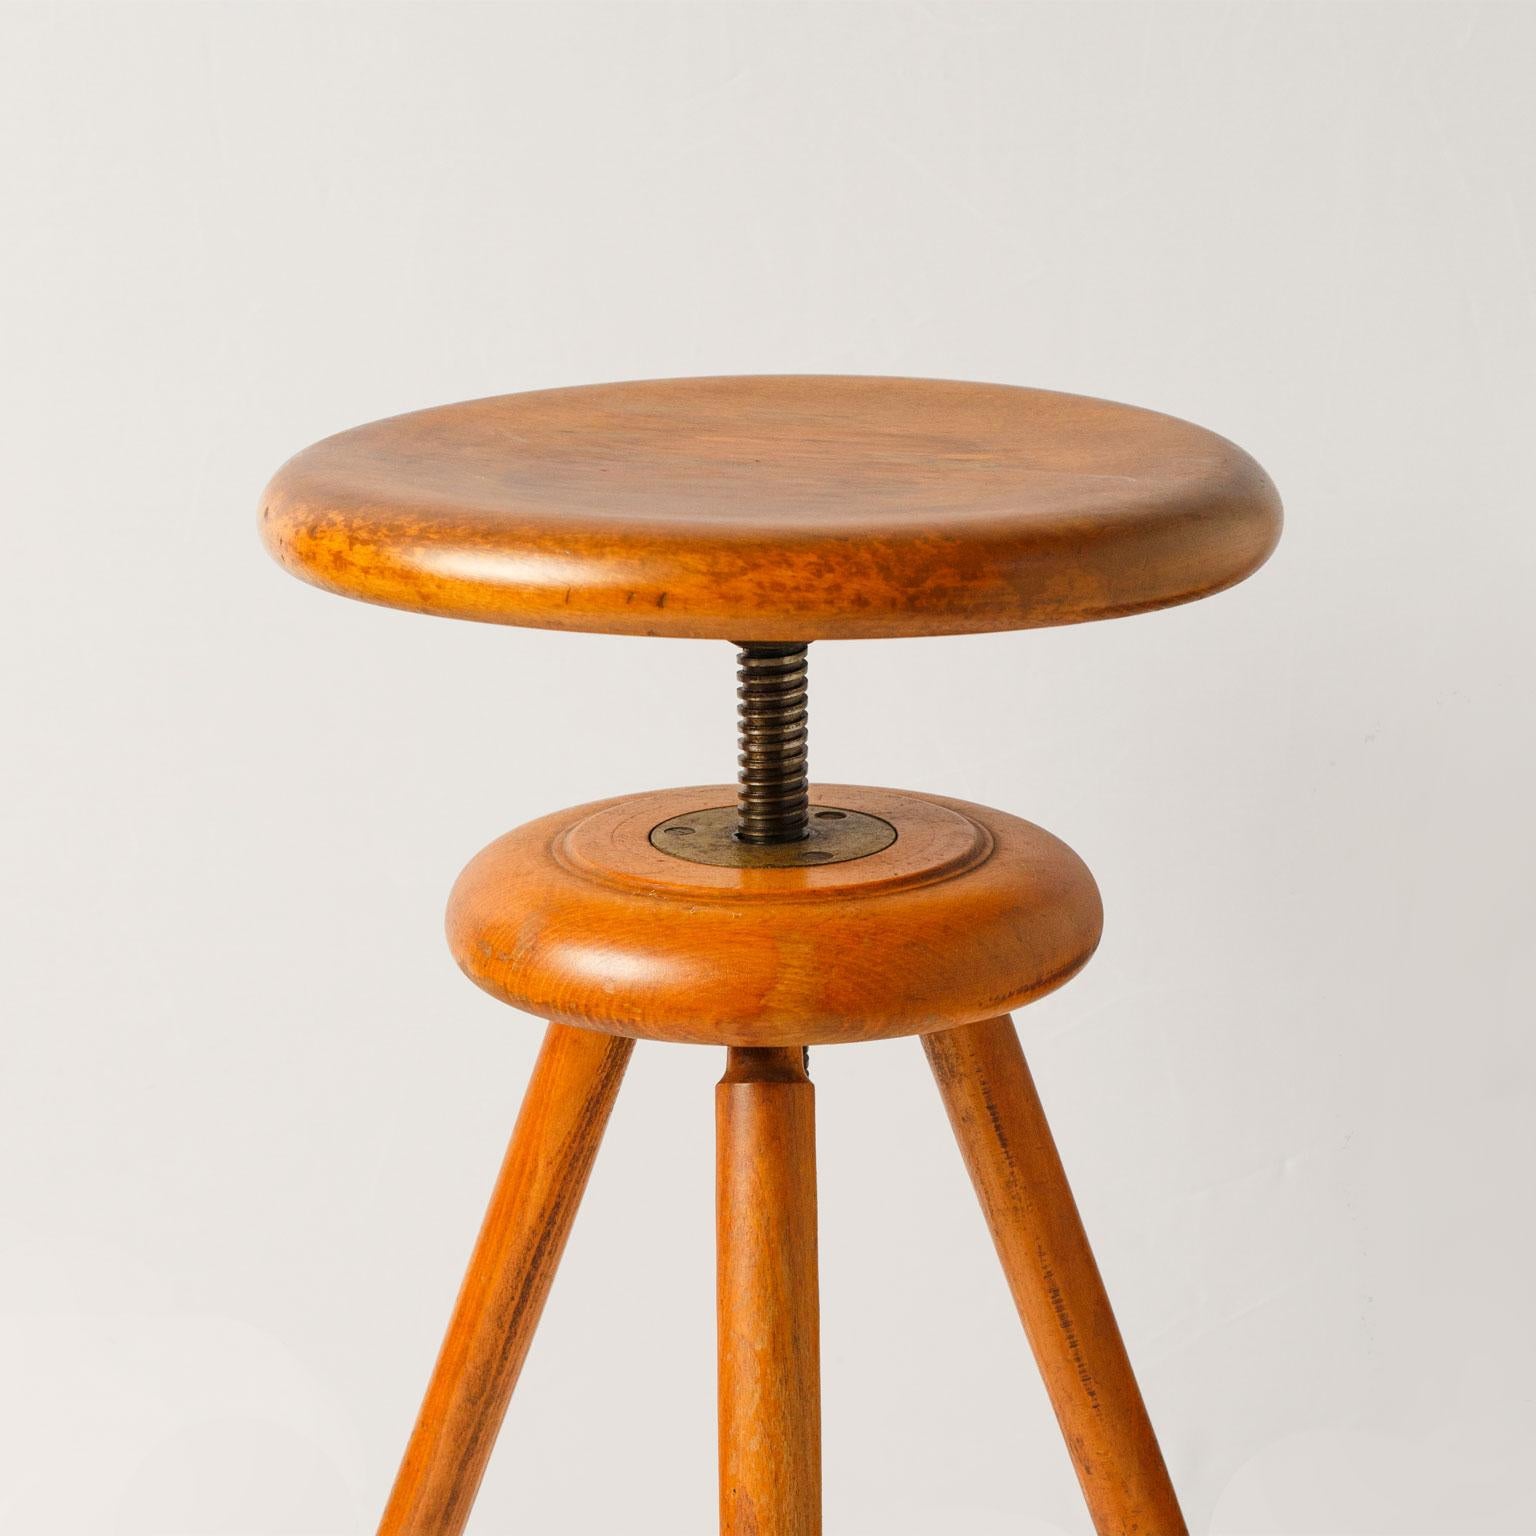 Artists stool (circa 1930-1950). Wood and iron construction. Sold, sturdy with an adjustable seat.